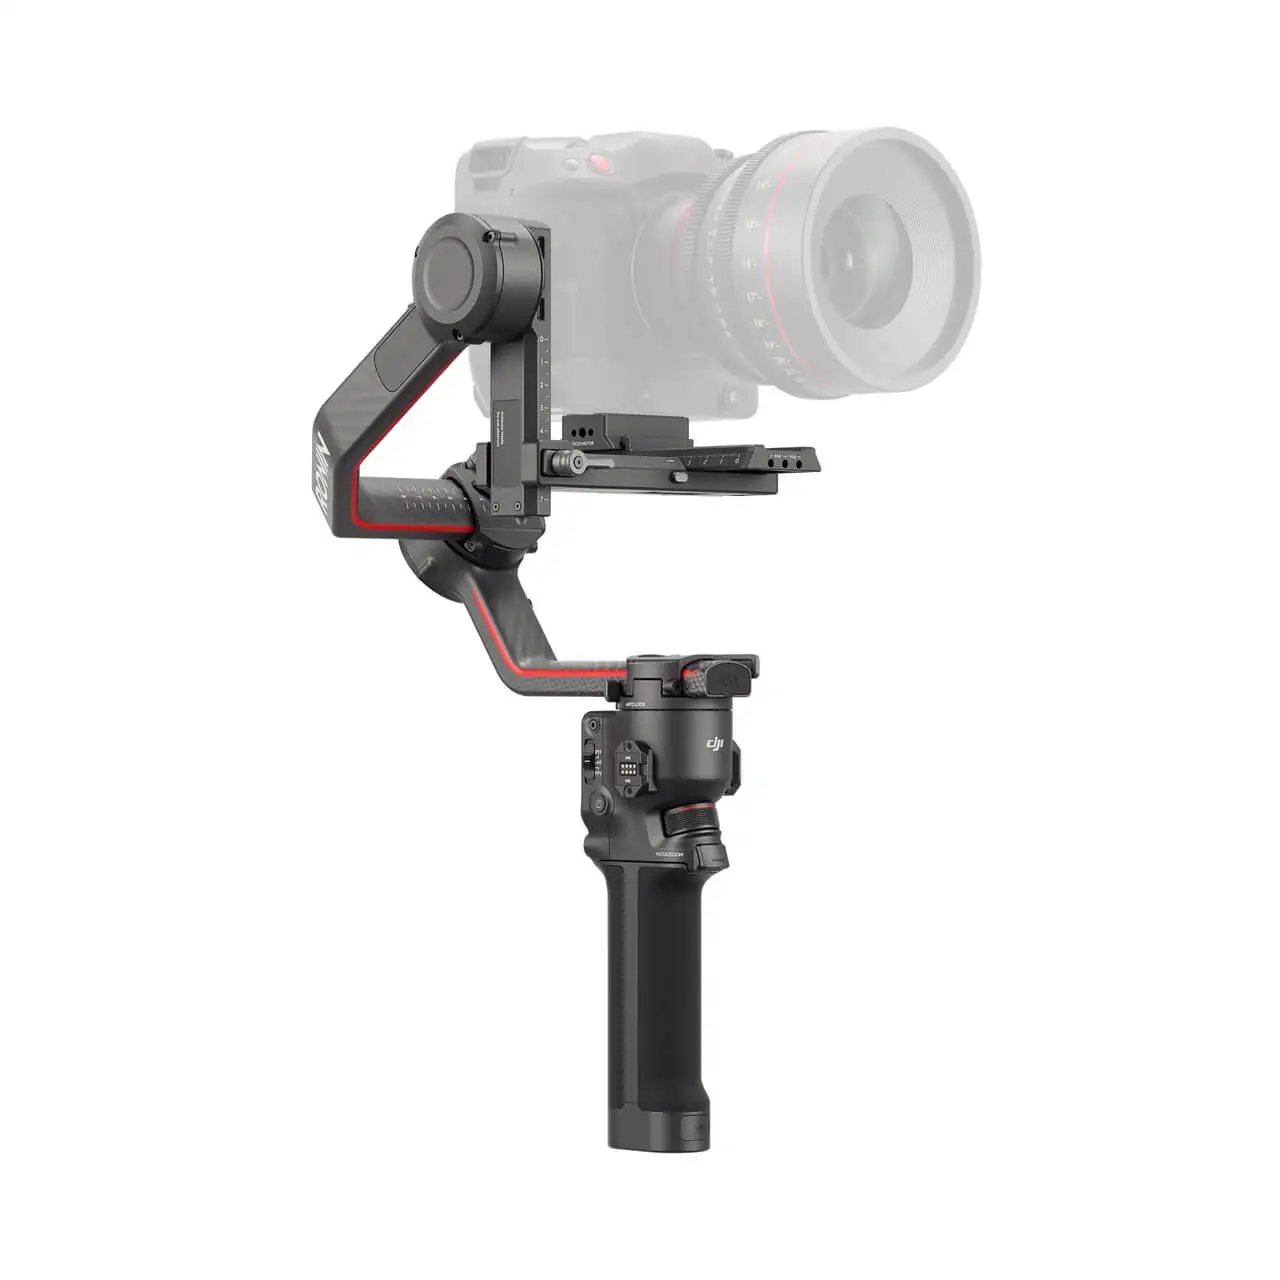 

RS 3 Pro Professional Handheld Gimbal Stabilizer with DSLR Supports expansion with vehicle mount, Steadicam, slider, cable cam